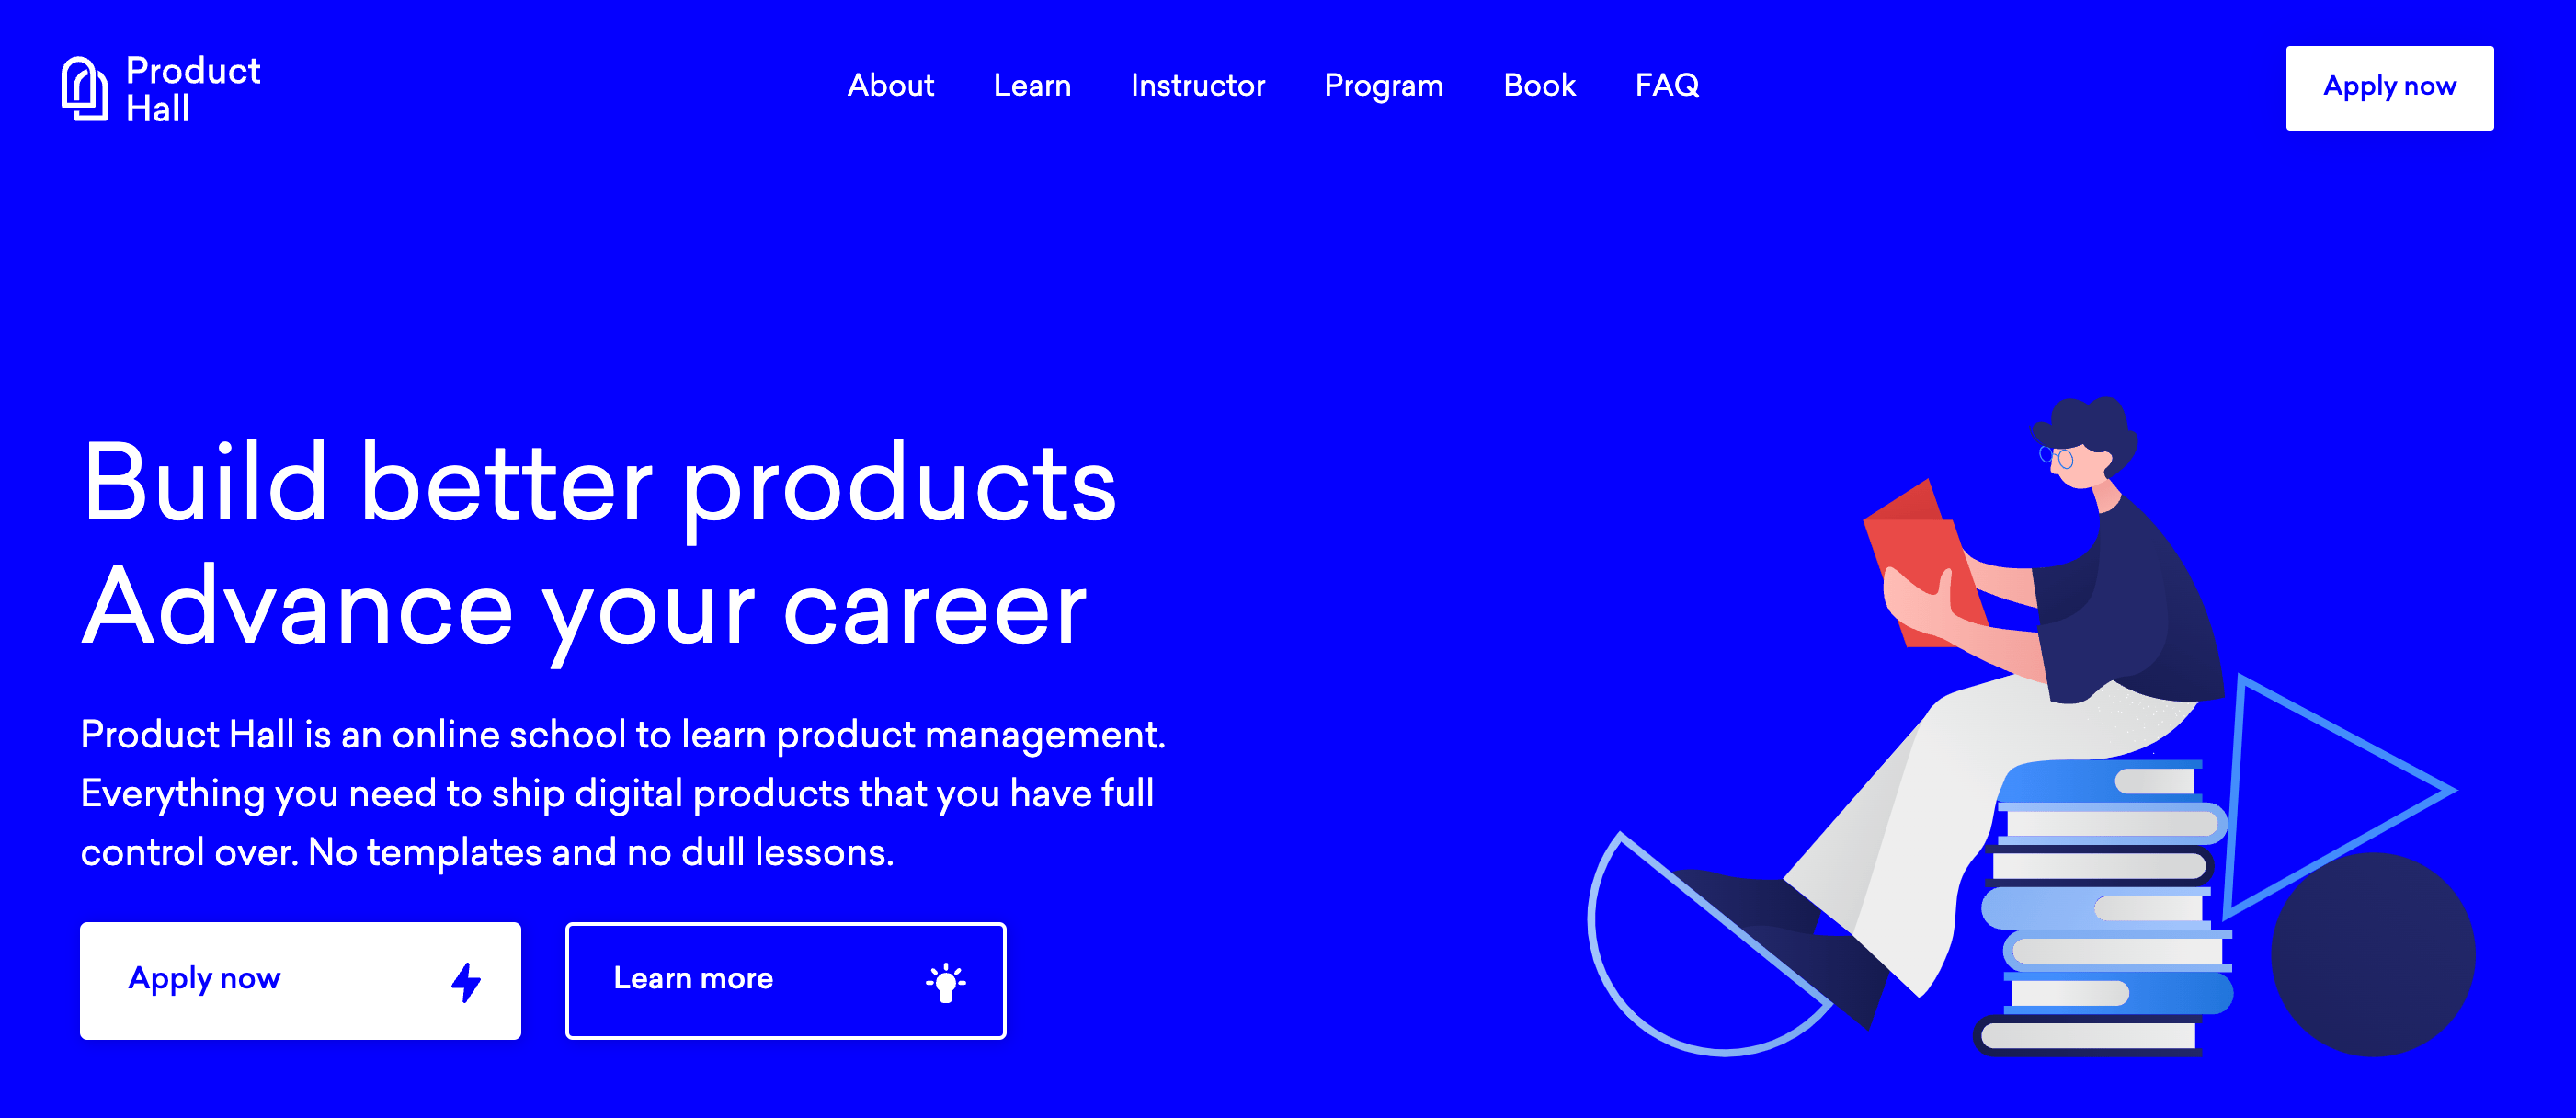 Screenshot of the Product Hall product management bootcamp homepage.